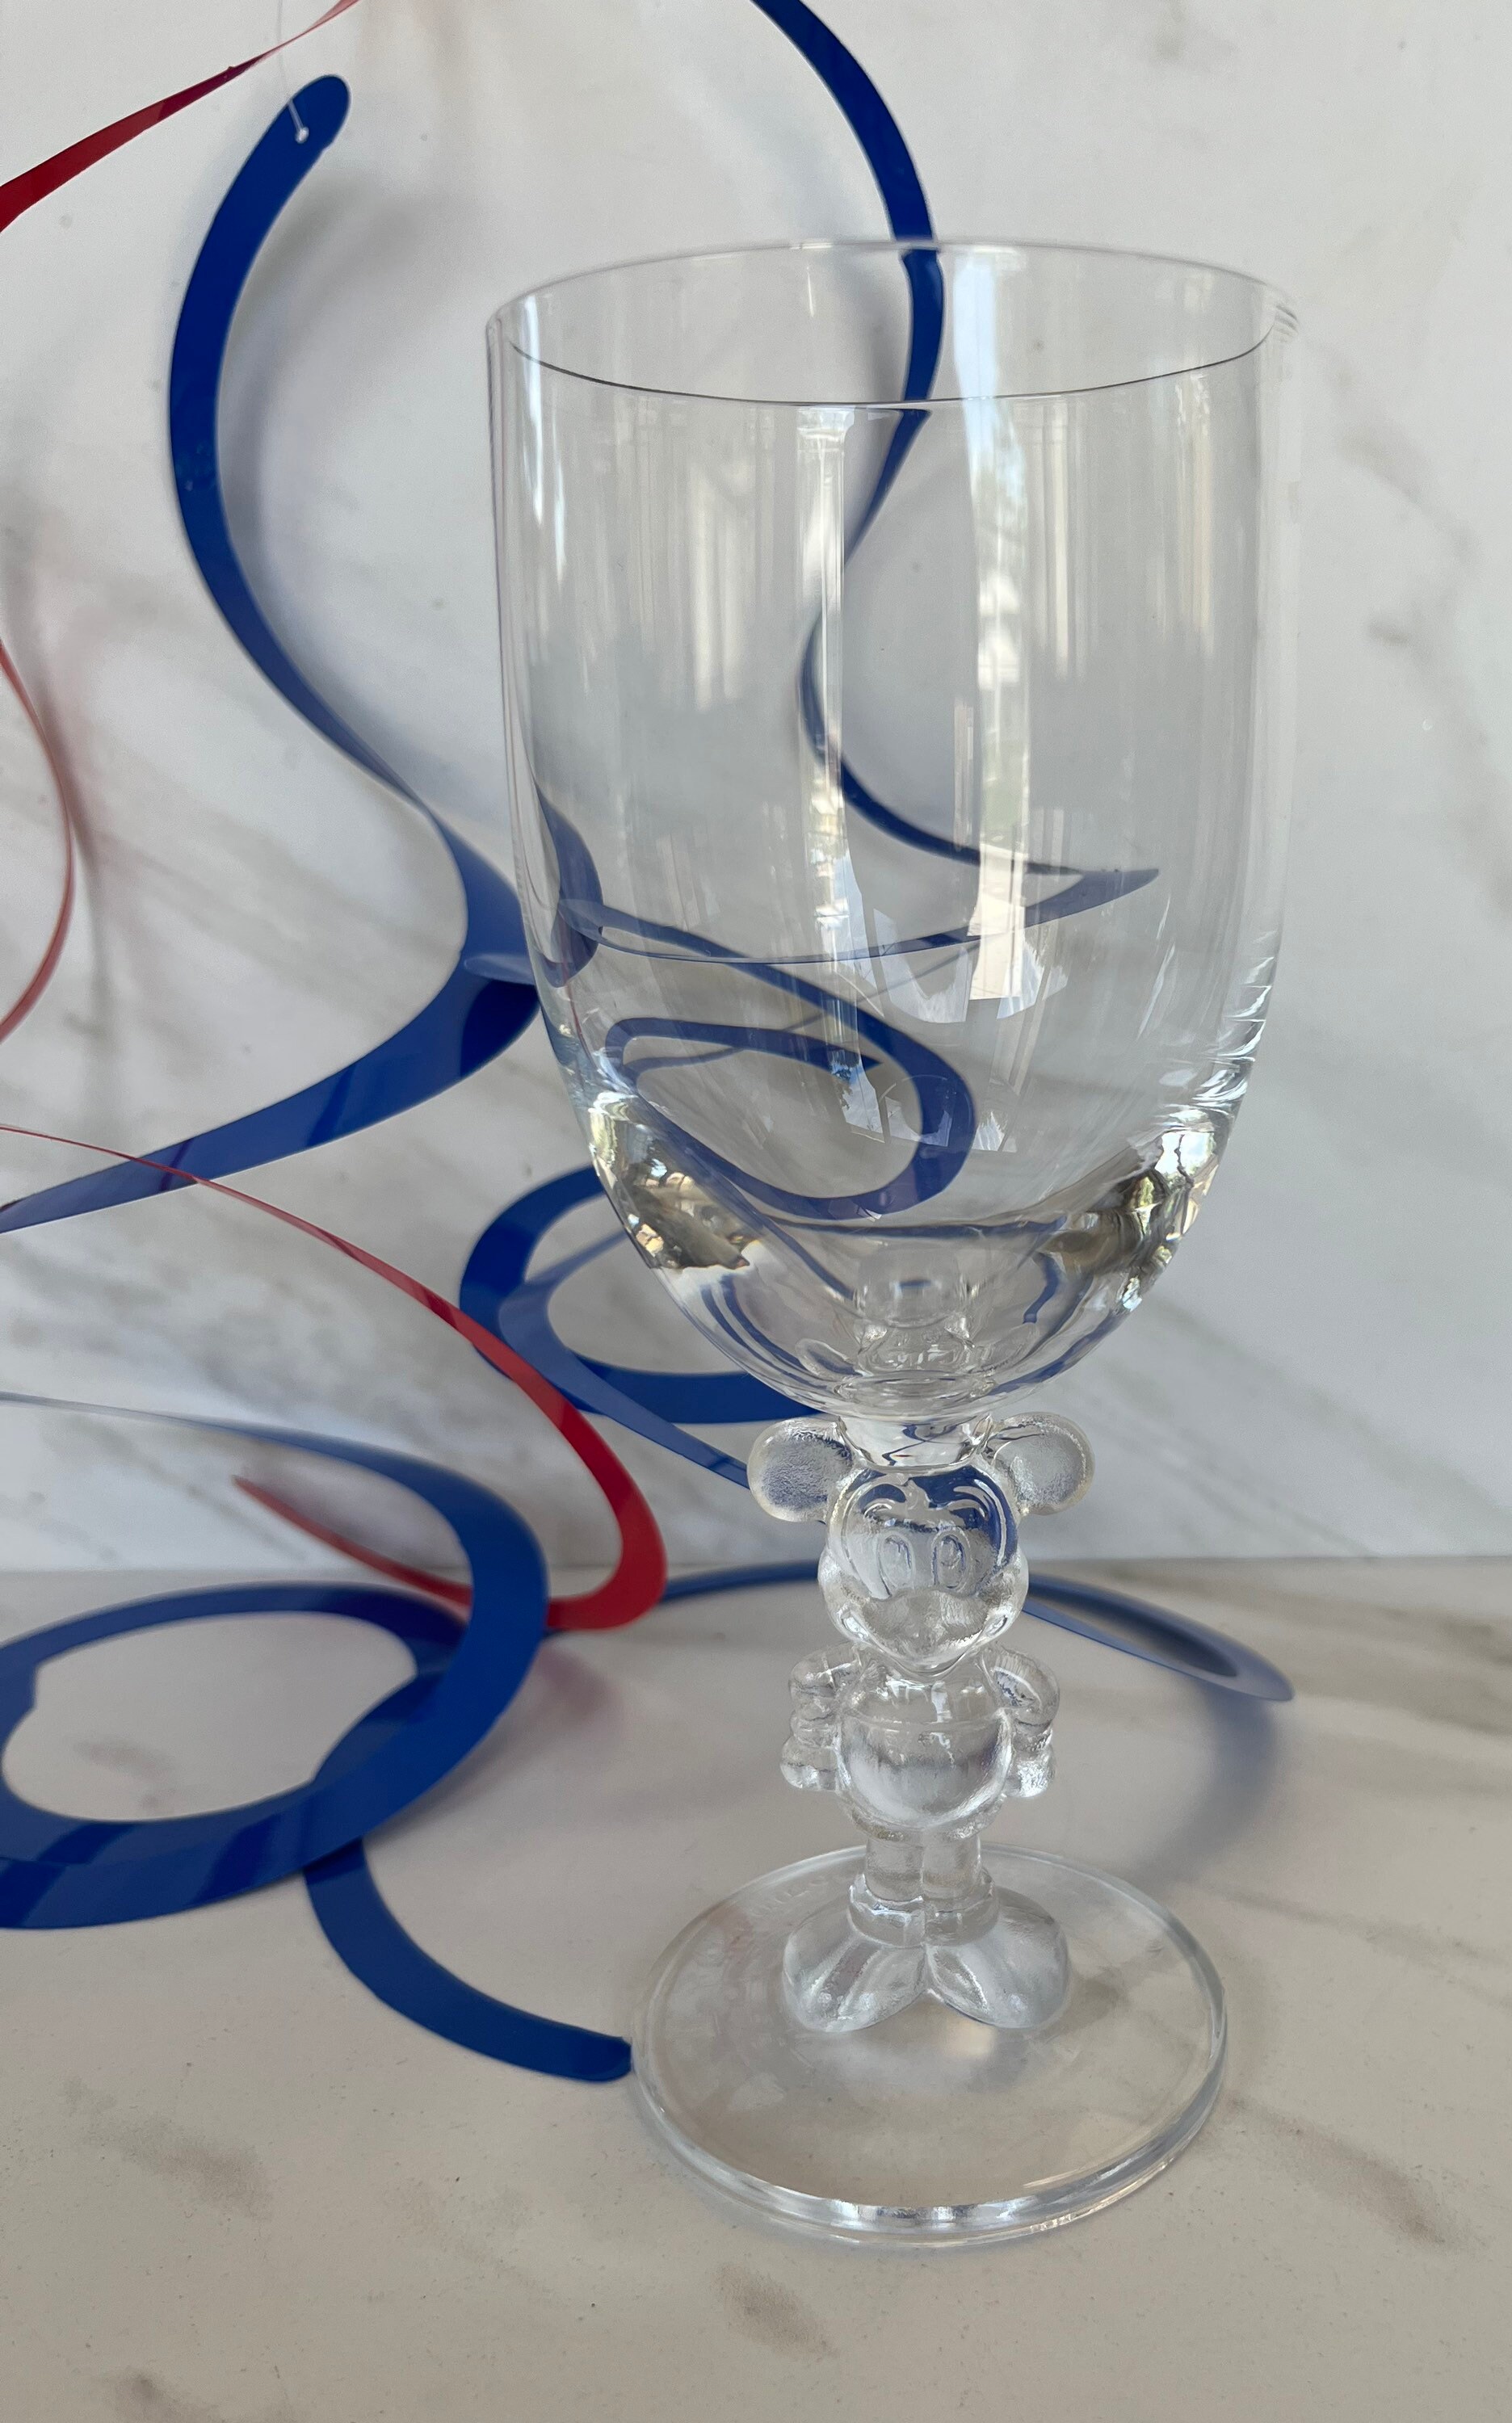 DISNEY WINE GLASS WITH ETCHED MICKEY MOUSE HEAD SET OF TWO